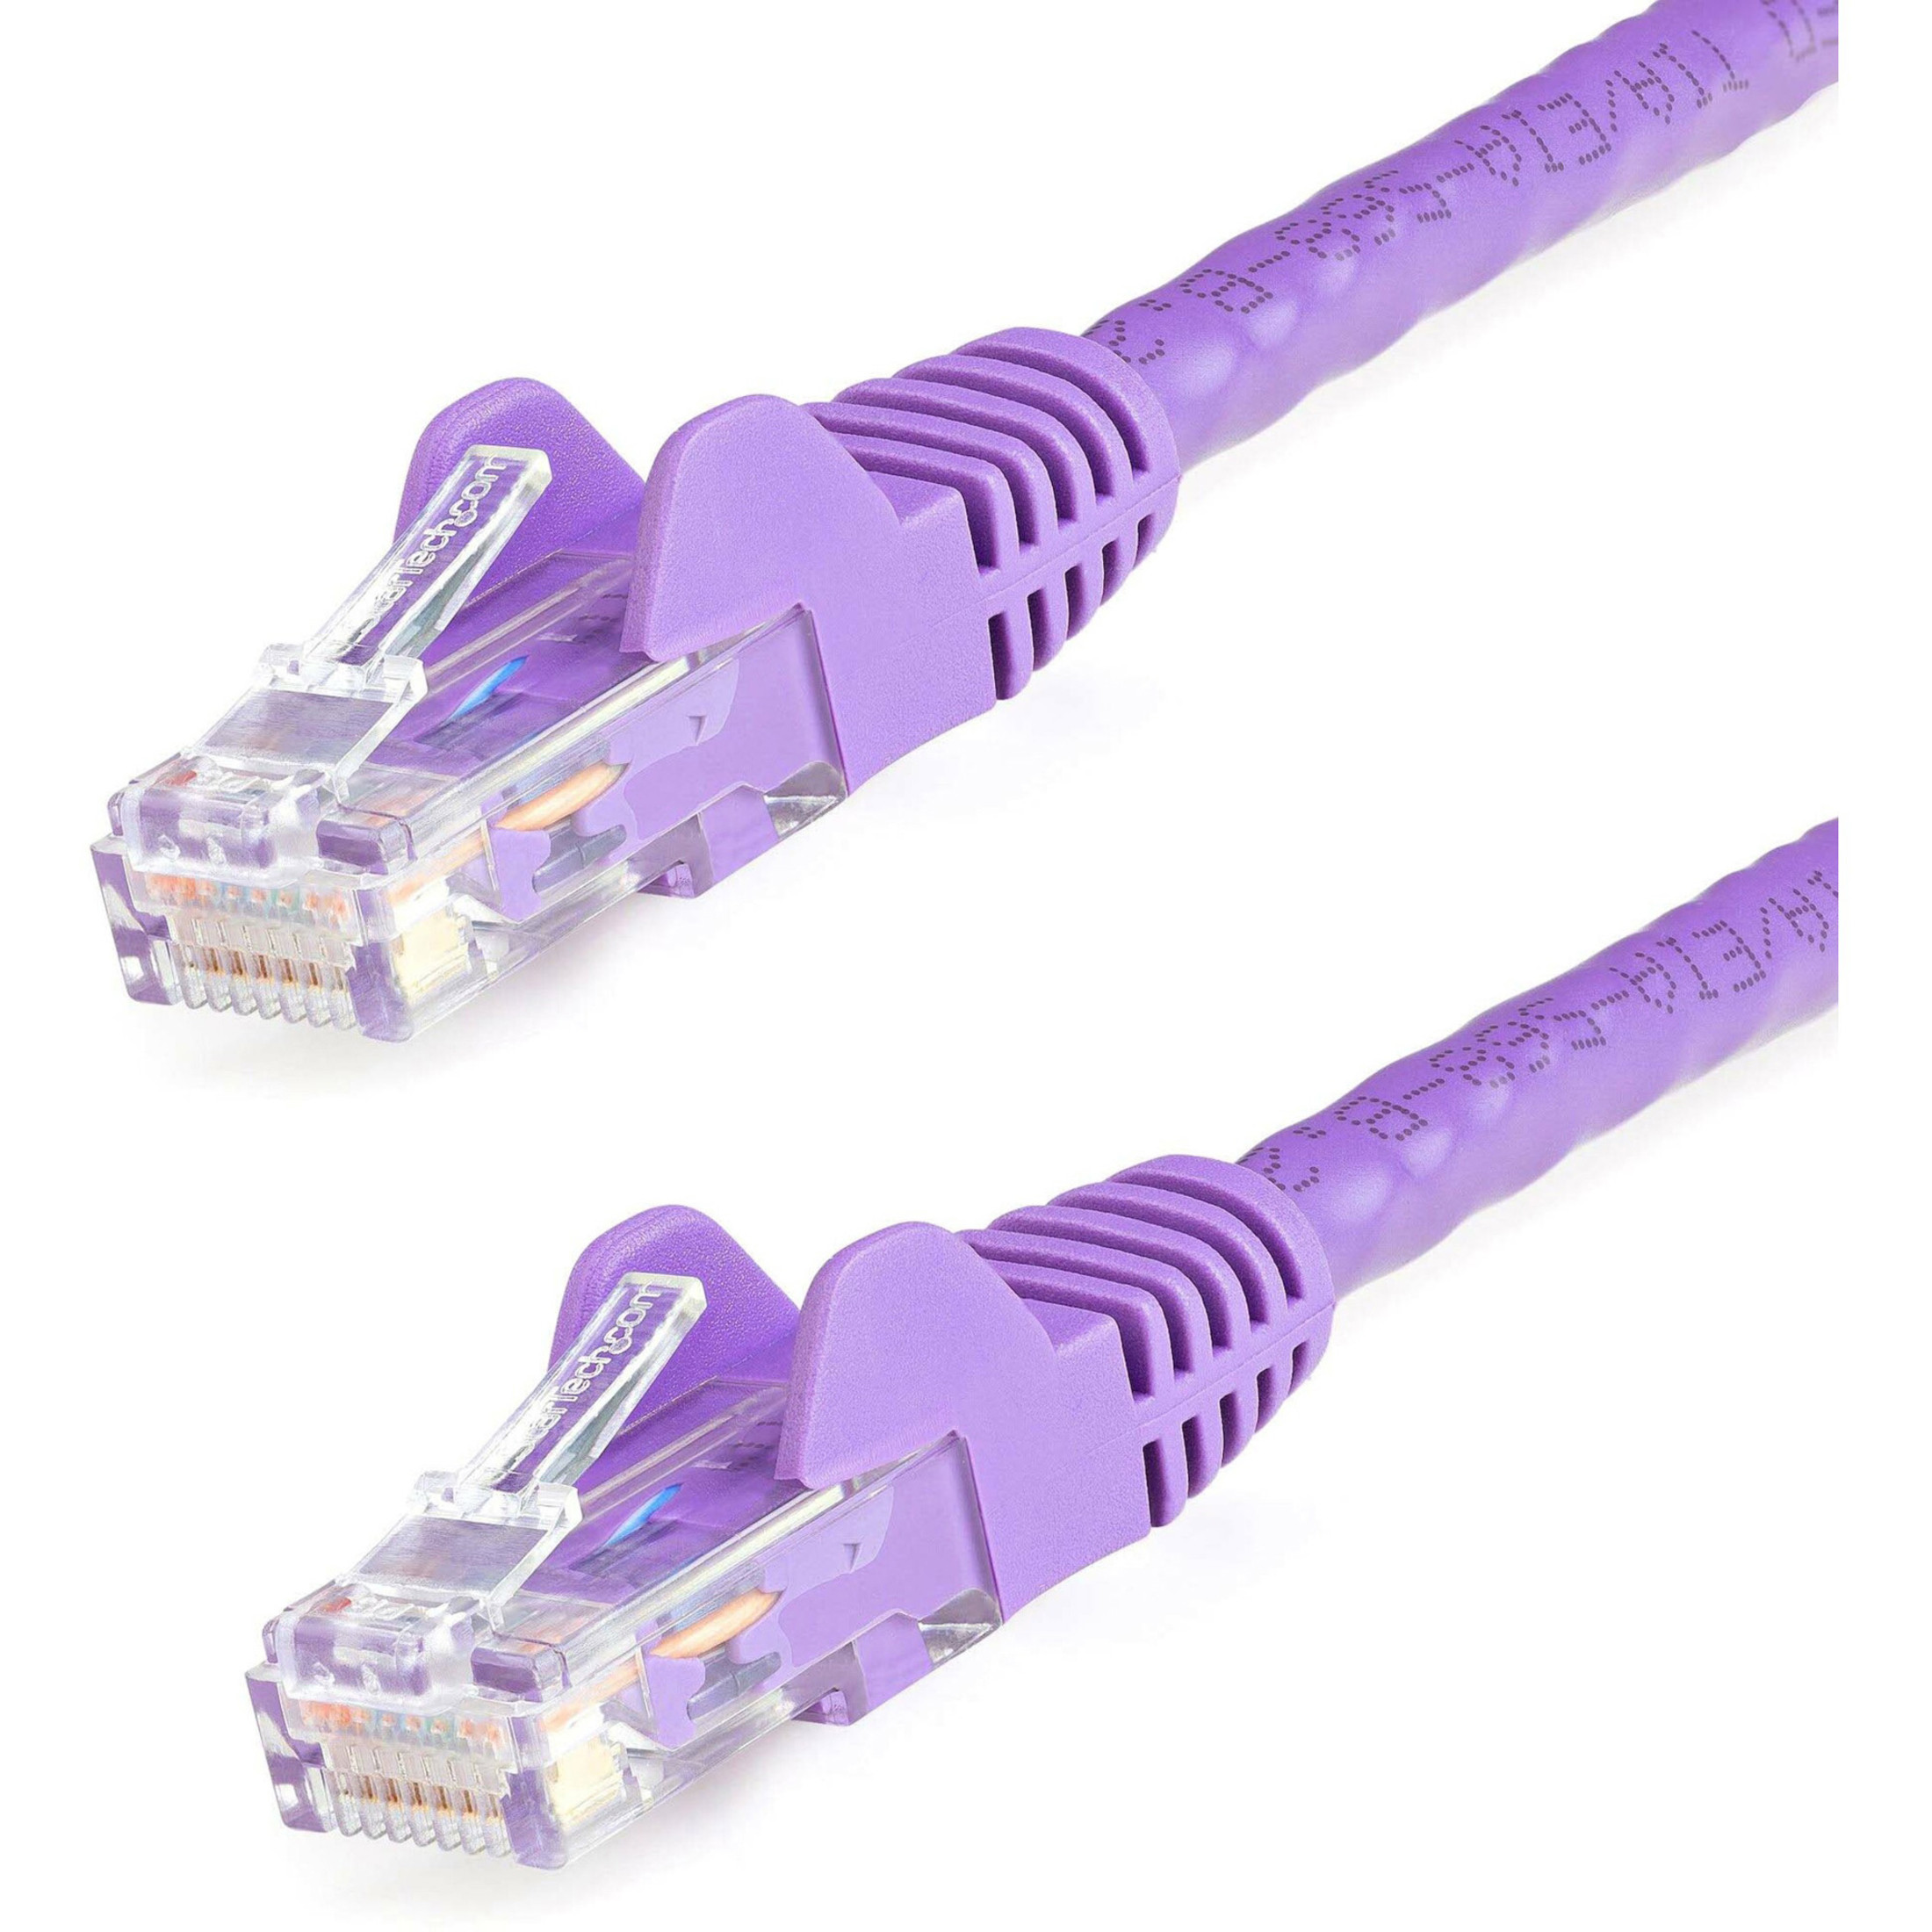 Startech .com 7ft CAT6 Ethernet CablePurple Snagless Gigabit100W PoE UTP 650MHz Category 6 Patch Cord UL Certified Wiring/TIA7ft Purp… N6PATCH7PL